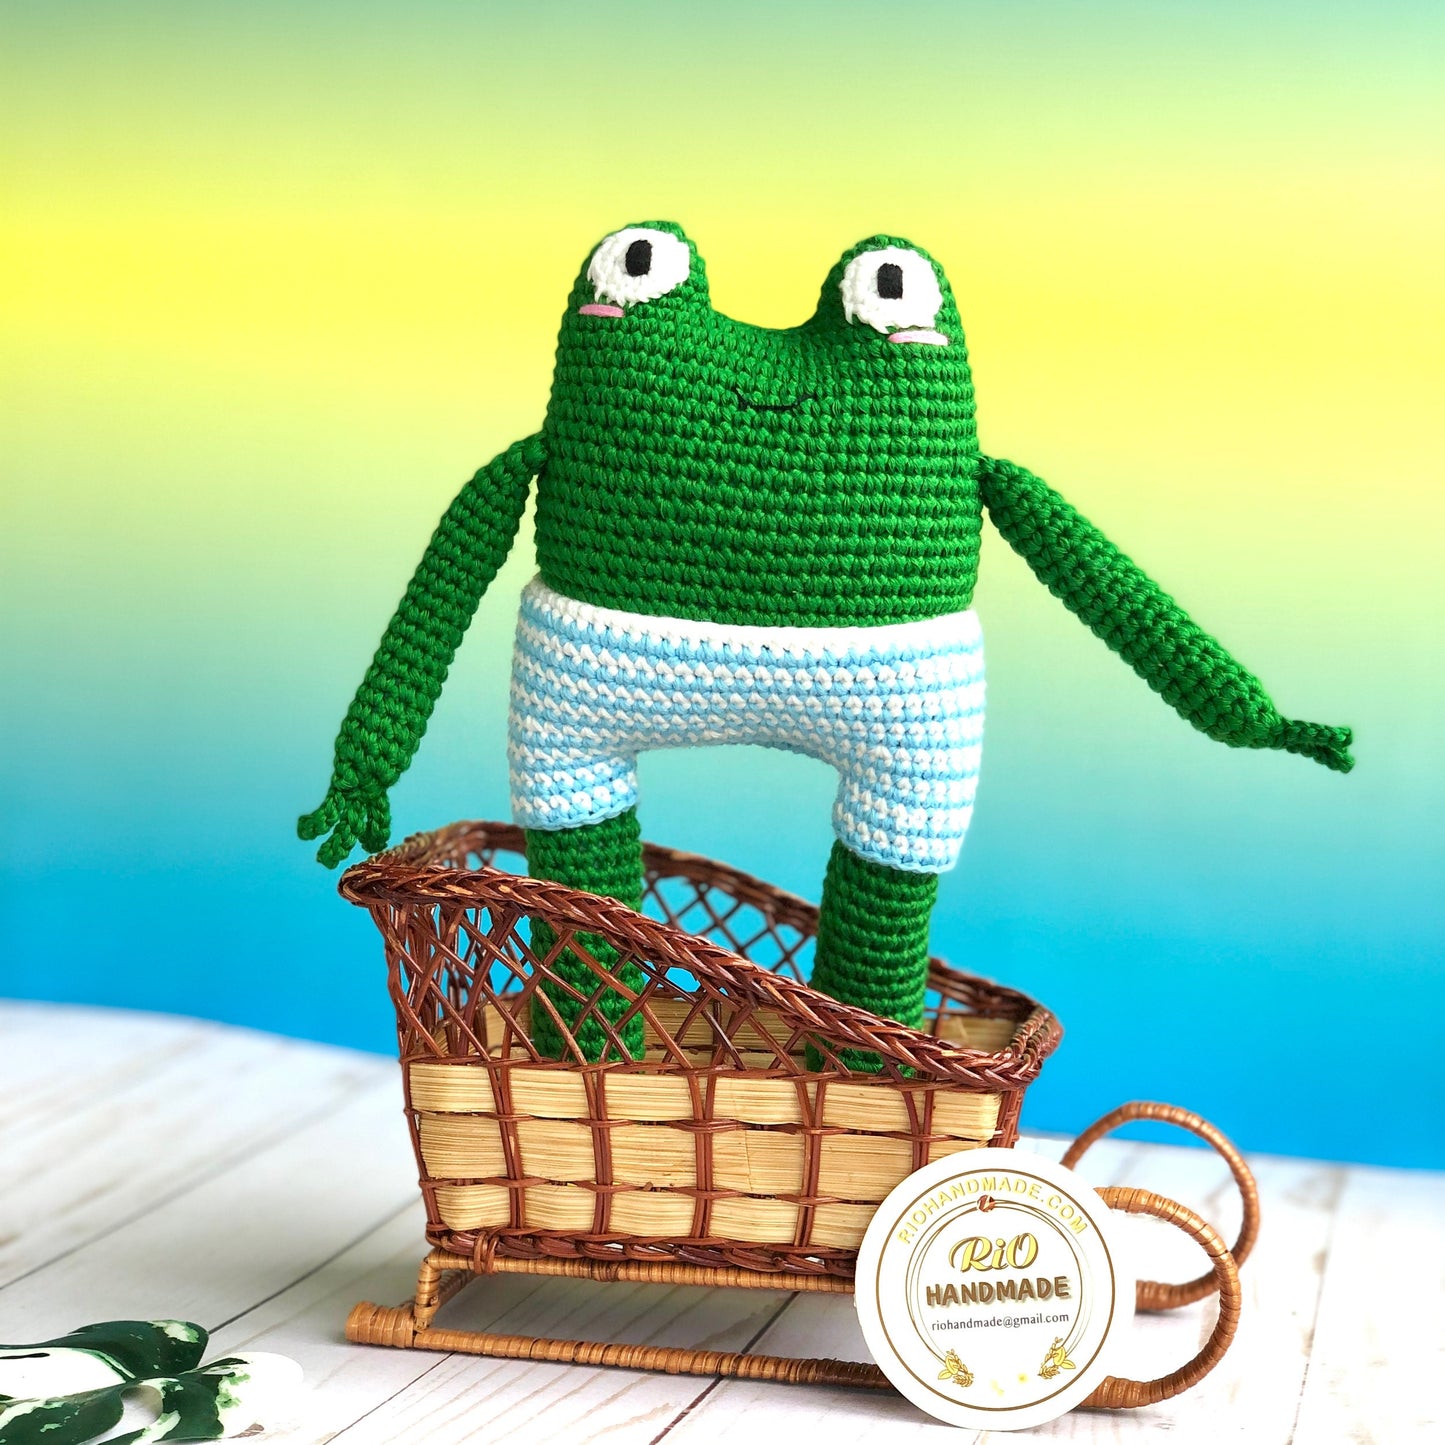 Handmade Frog crochet, amigurumi Frog plush, soft toy for kid, perfect idea for gifts, present, craft doll, Pica Pau